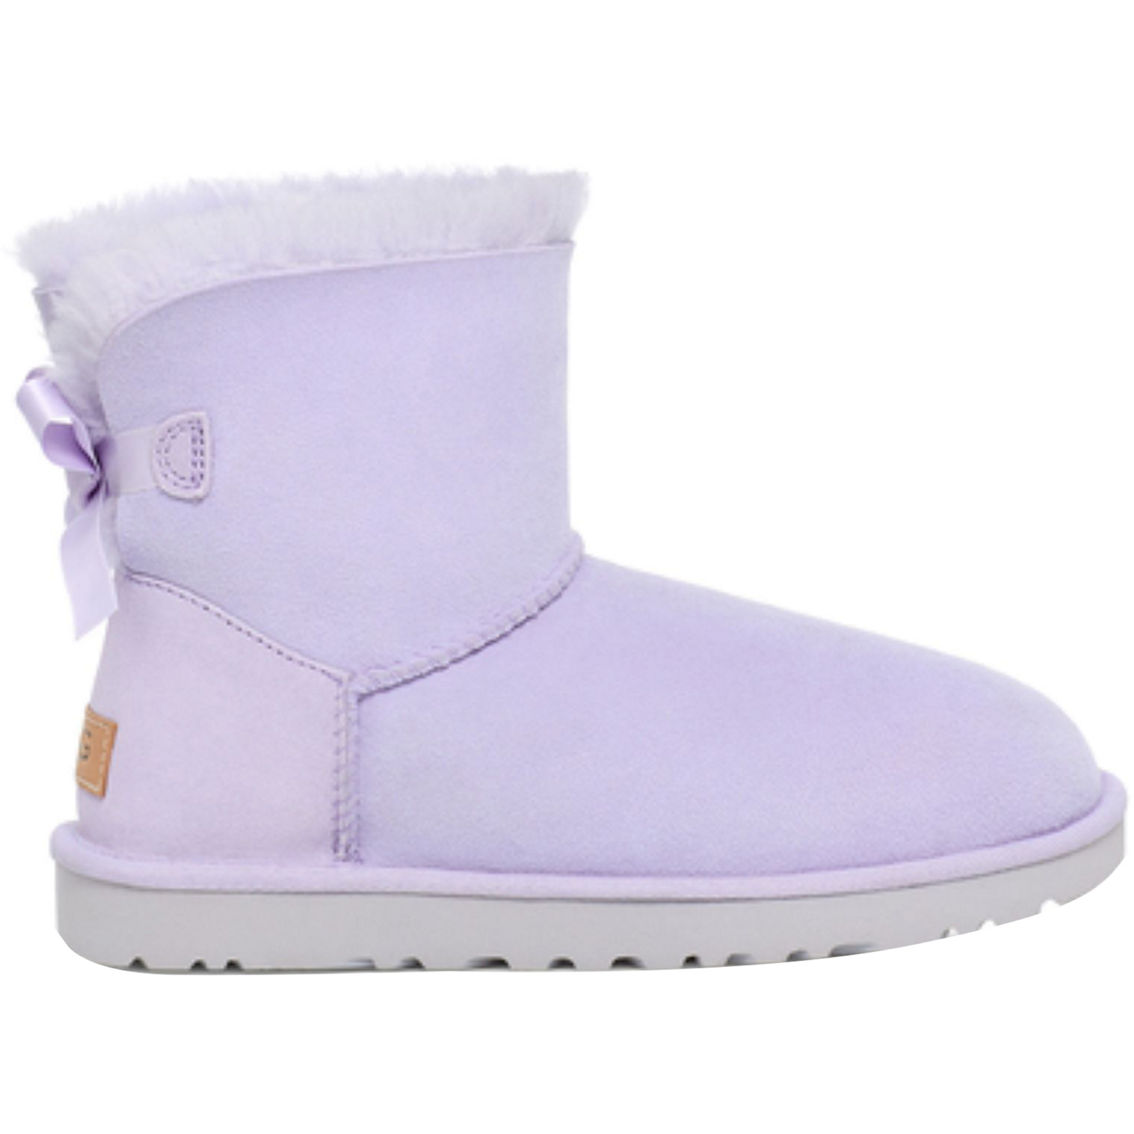 Ugg Mini Bailey Bow Boots | Boots | Shoes | Shop The Exchange